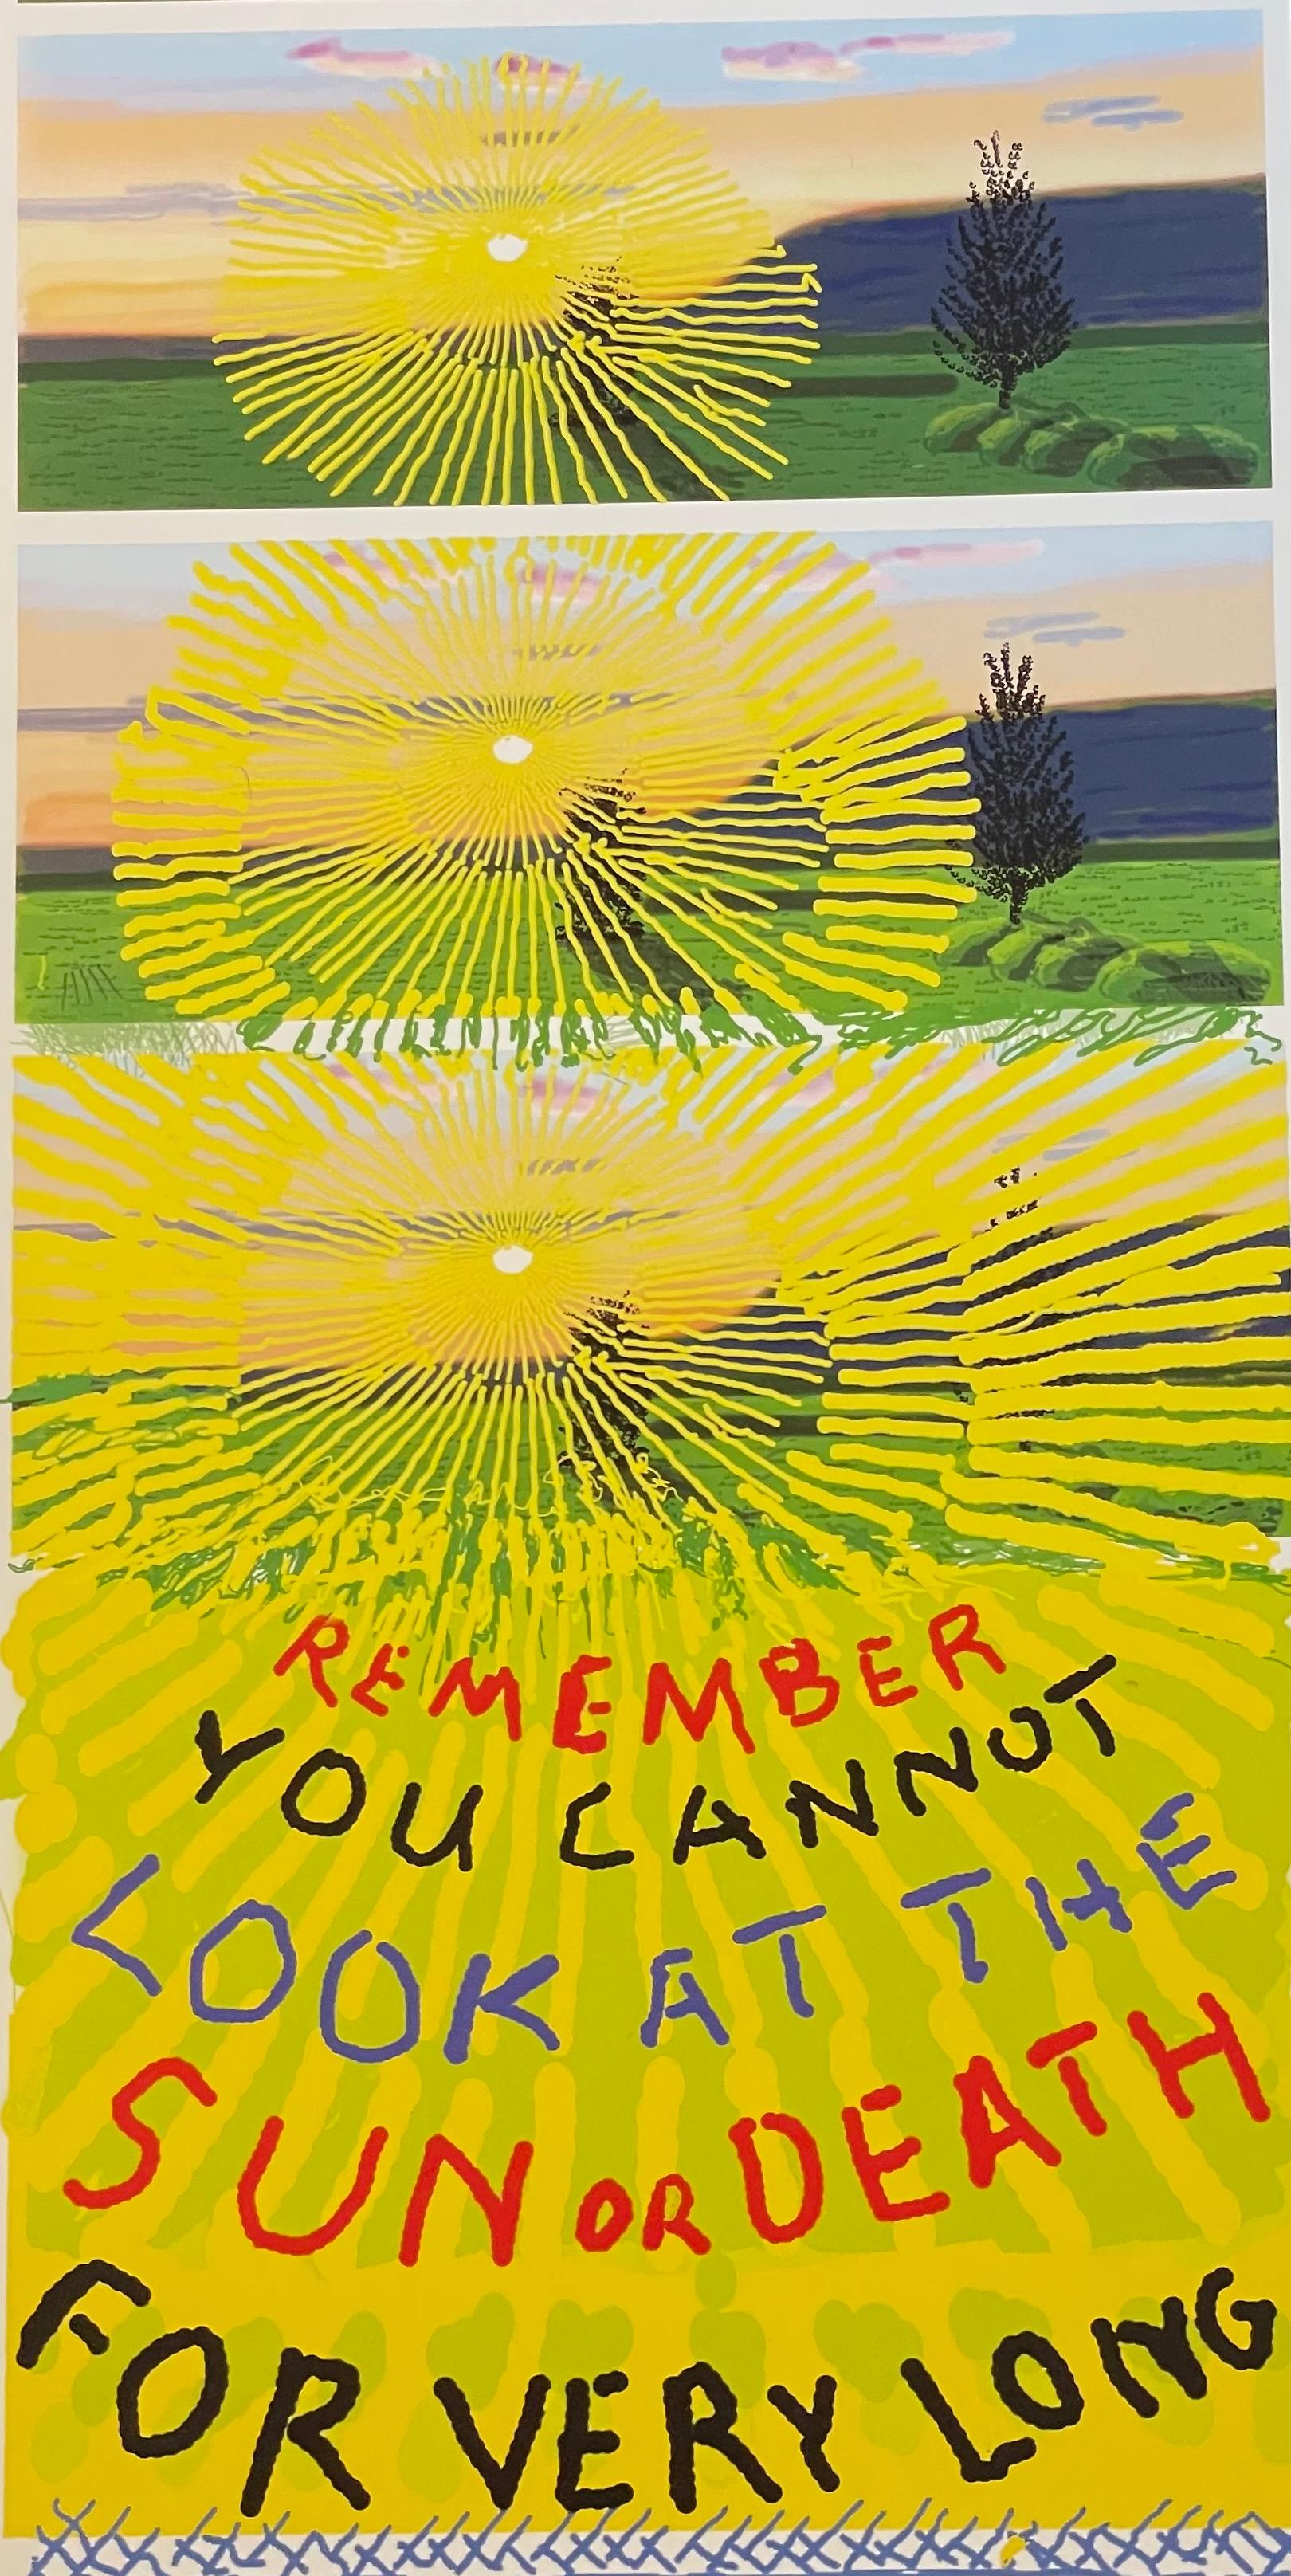 To coincide with this global show of hope, David Hockney has created this new limited edition lithographic printed poster with a yellow silkscreen overlay.

This May, outdoor screens around the world unite to present a new video work by David